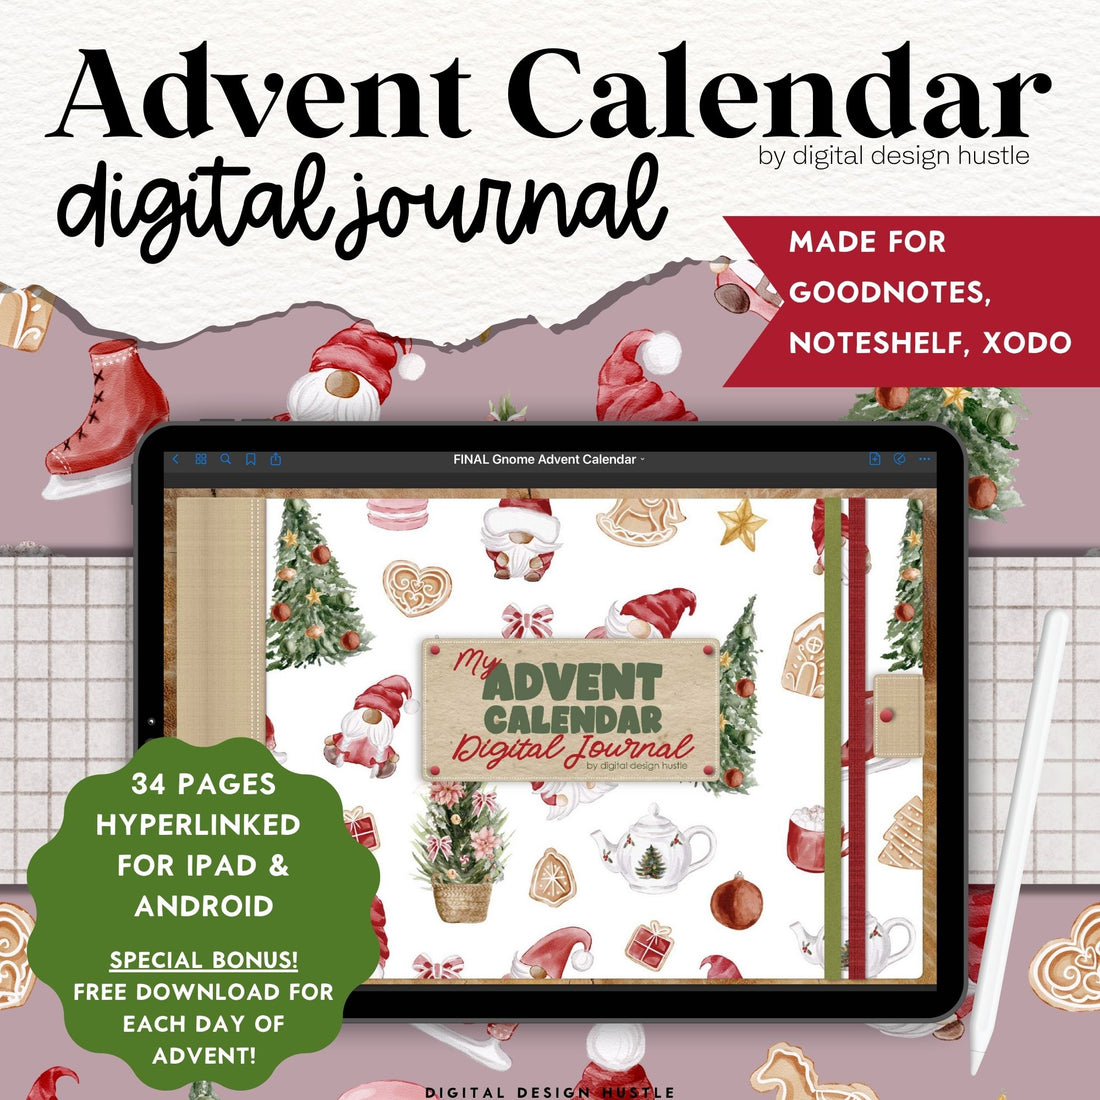 Celebrate the holiday season by counting down the days until Christmas with this Digital Advent Calendar With Stickers &amp; Free Christmas Printables. This adorable Gnome Advent Calendar is a digital planner just to celebrate the season of advent. This Christmas digital planner is the perfect way to countdown the season. This 34-page planner is filled with special gifts too. Each Advent Journal page contains a free printable that you can download each day leading up to Christmas.